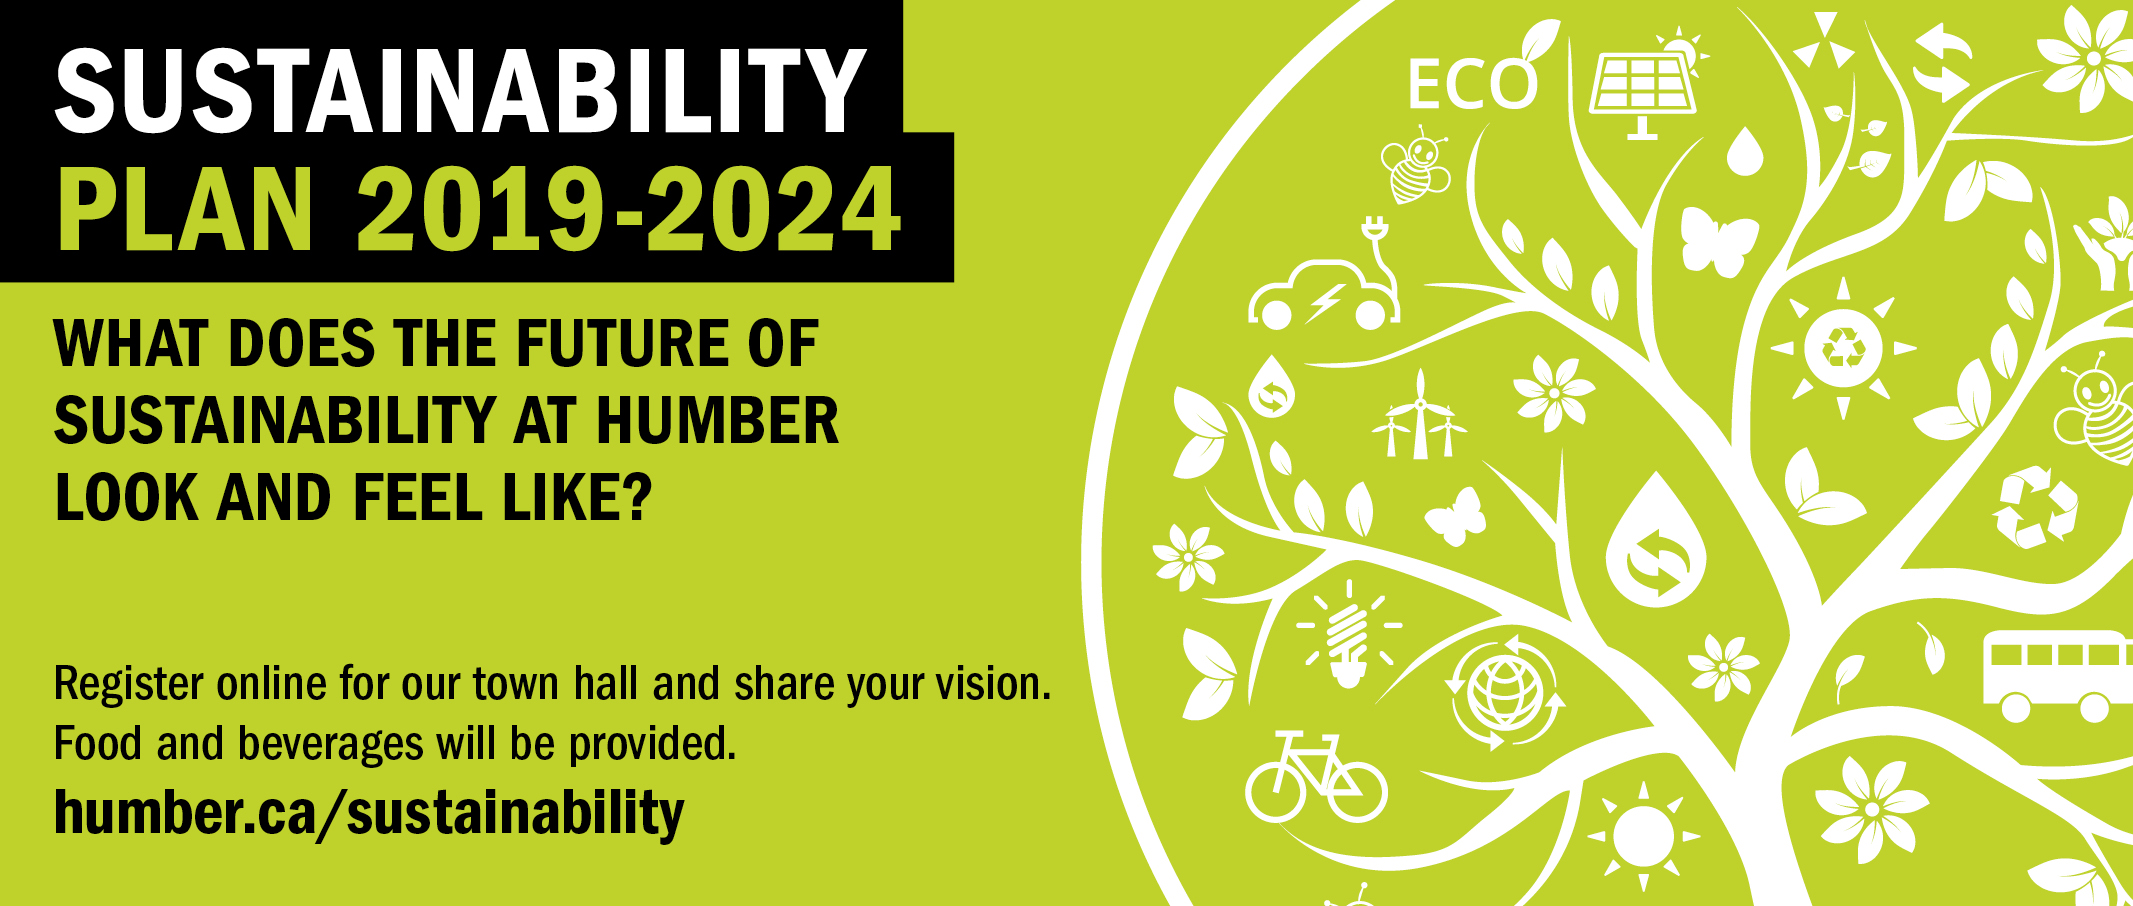 What does the future of sustainability at Humber look and feel like? Register online for our town hall and share your vision. Food and beverages will be provided. humber.ca/sustainability